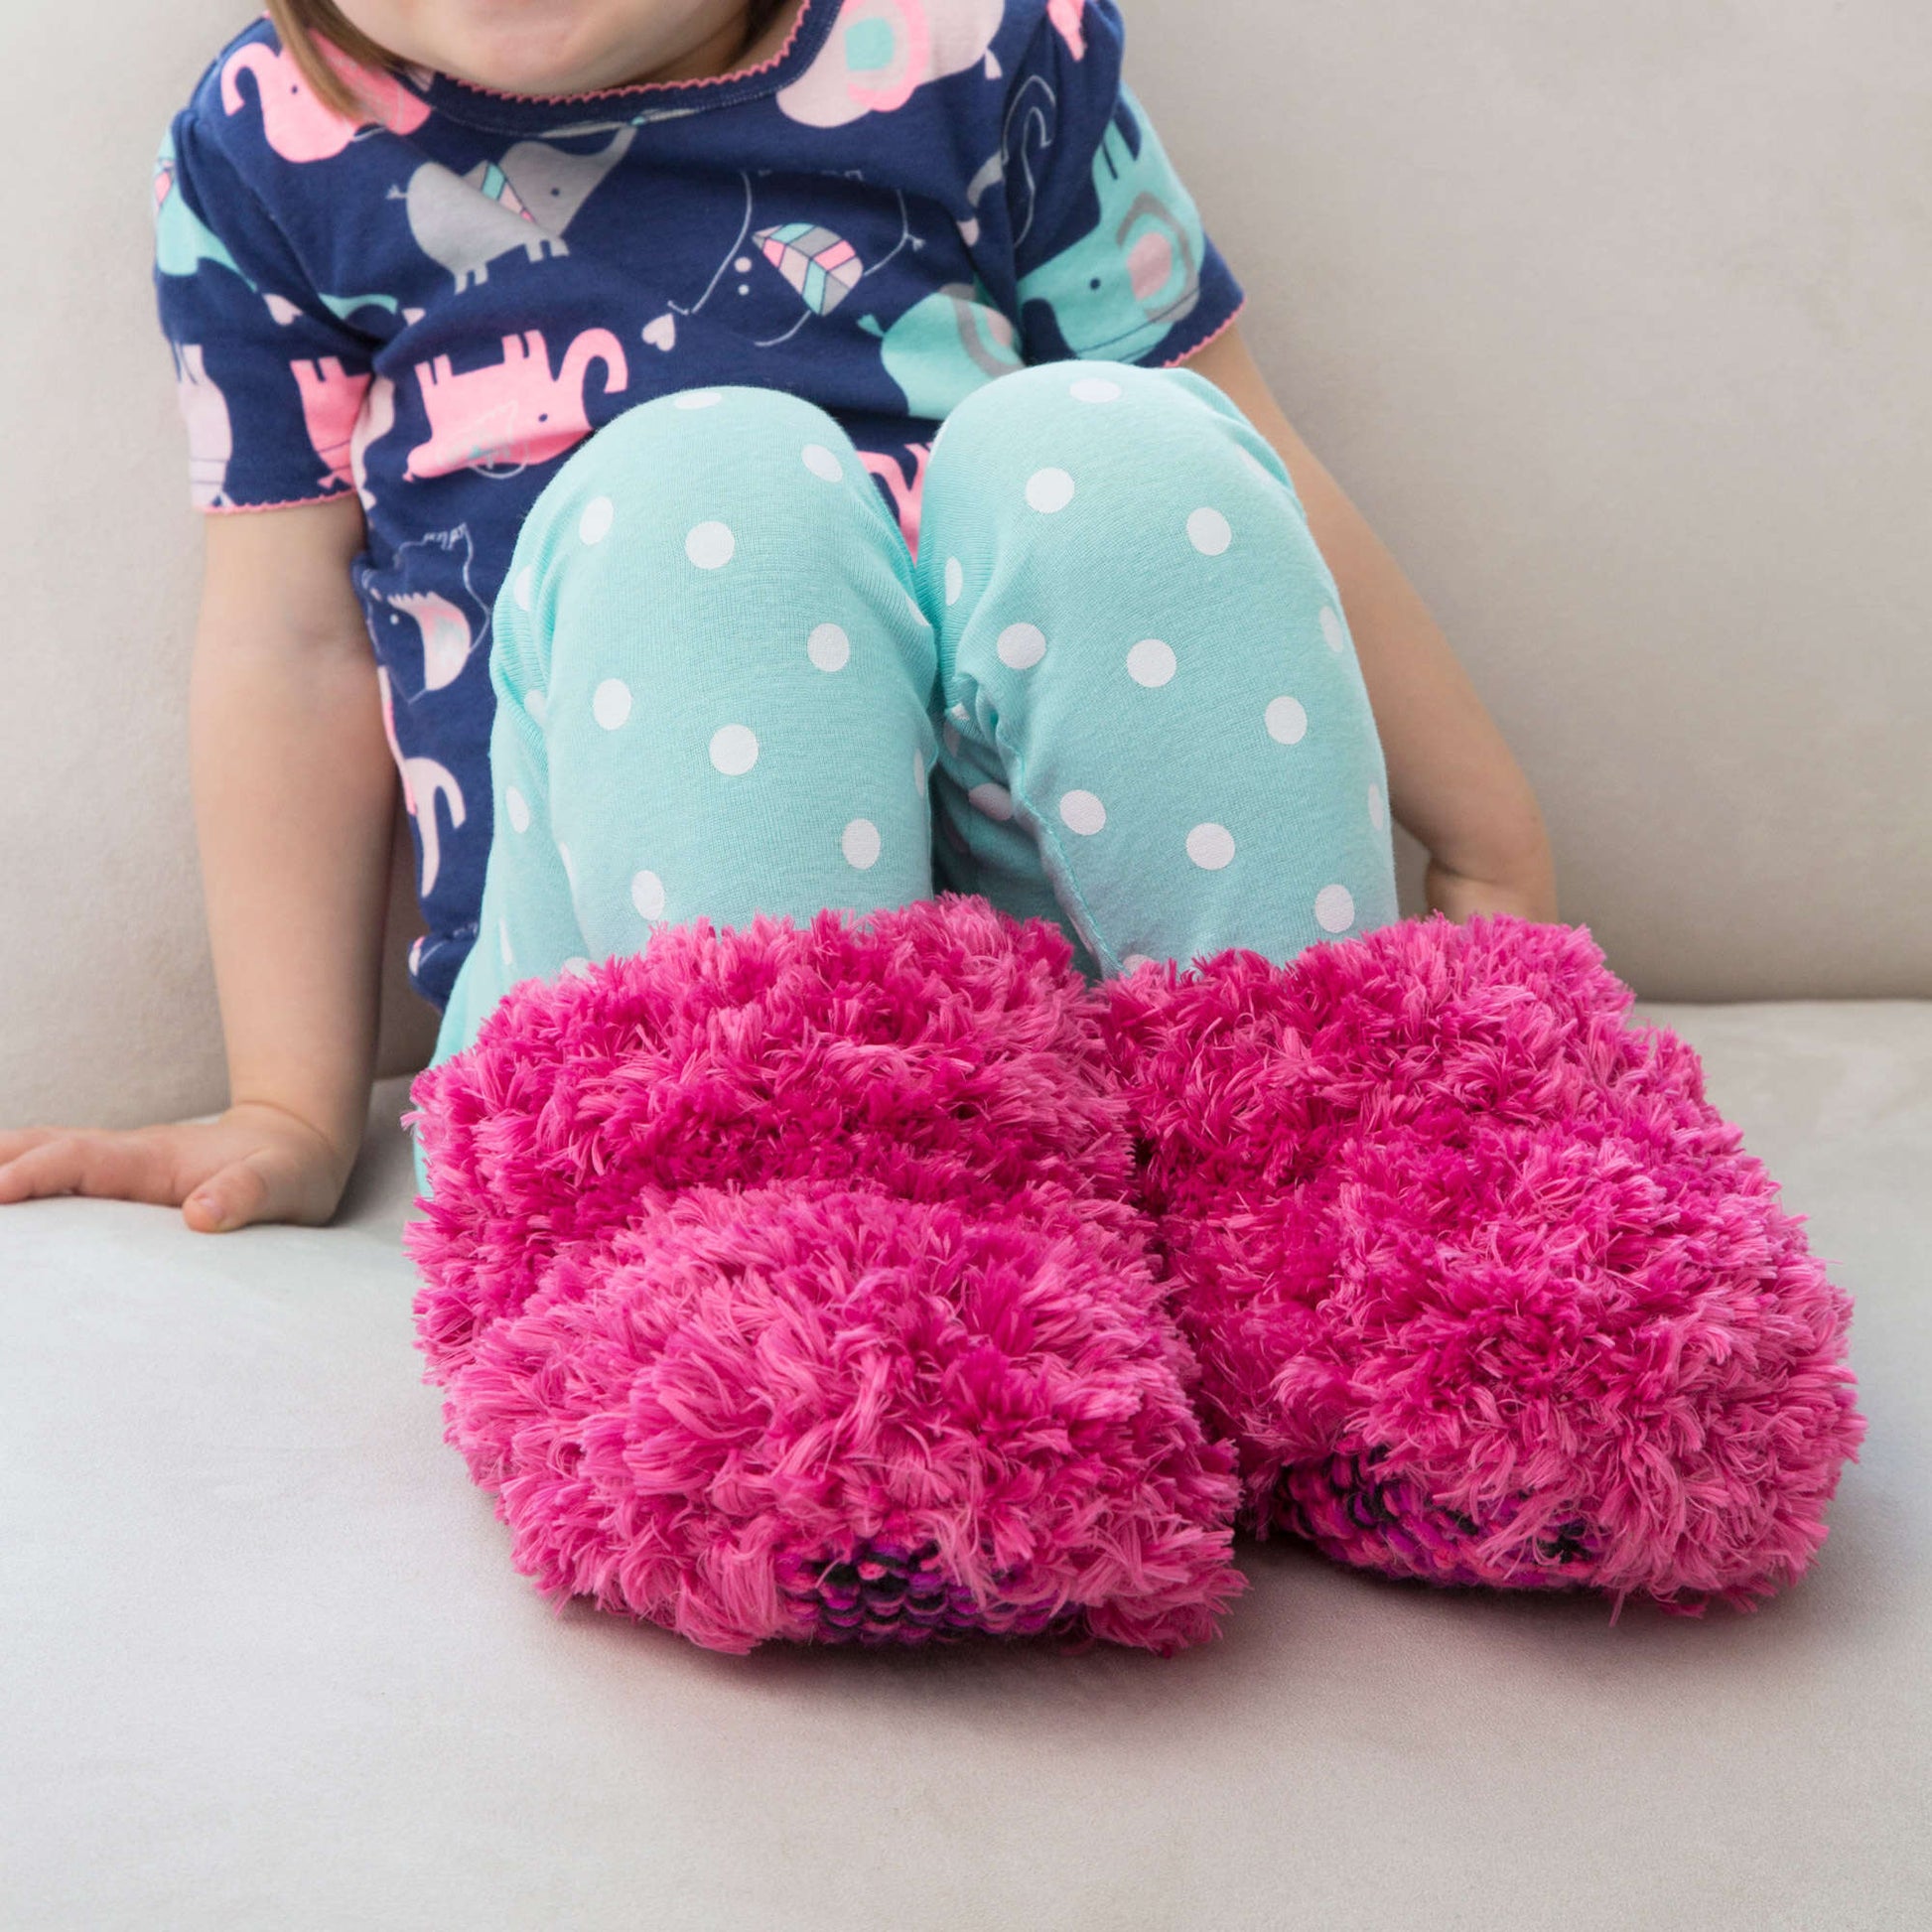 Free Red Heart Child Fur Boot Slippers Knit Pattern